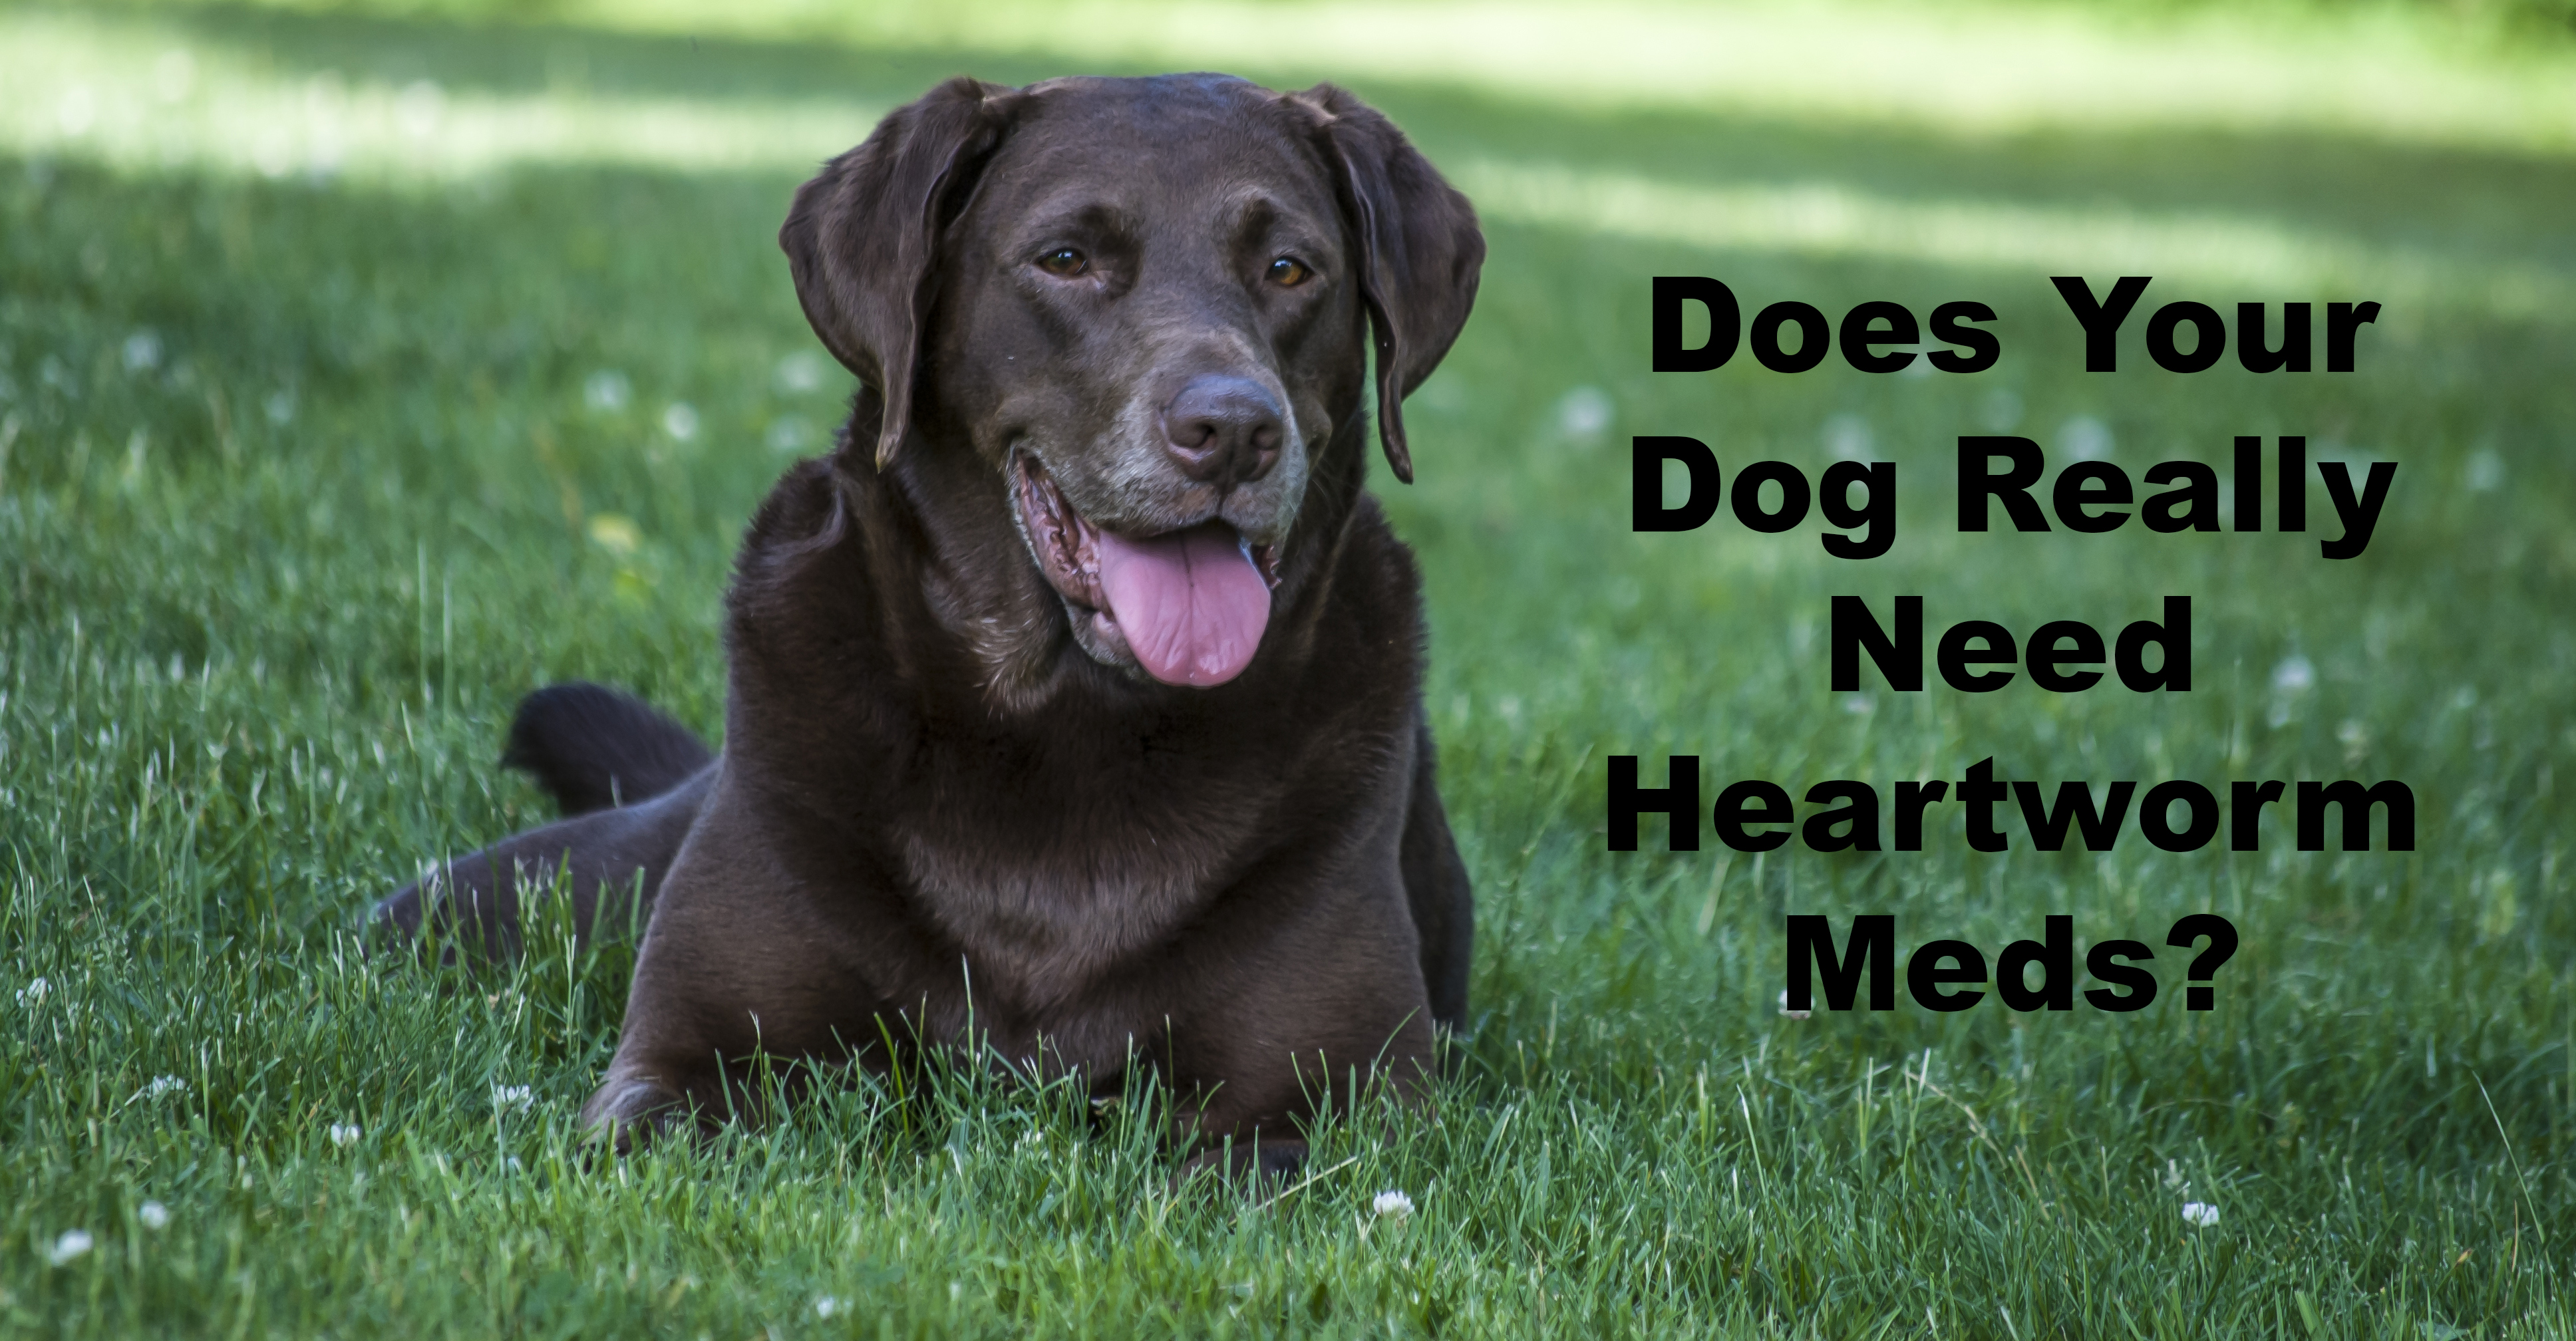 Heartworm Medication Part 1: Truths, Omissions and Profits